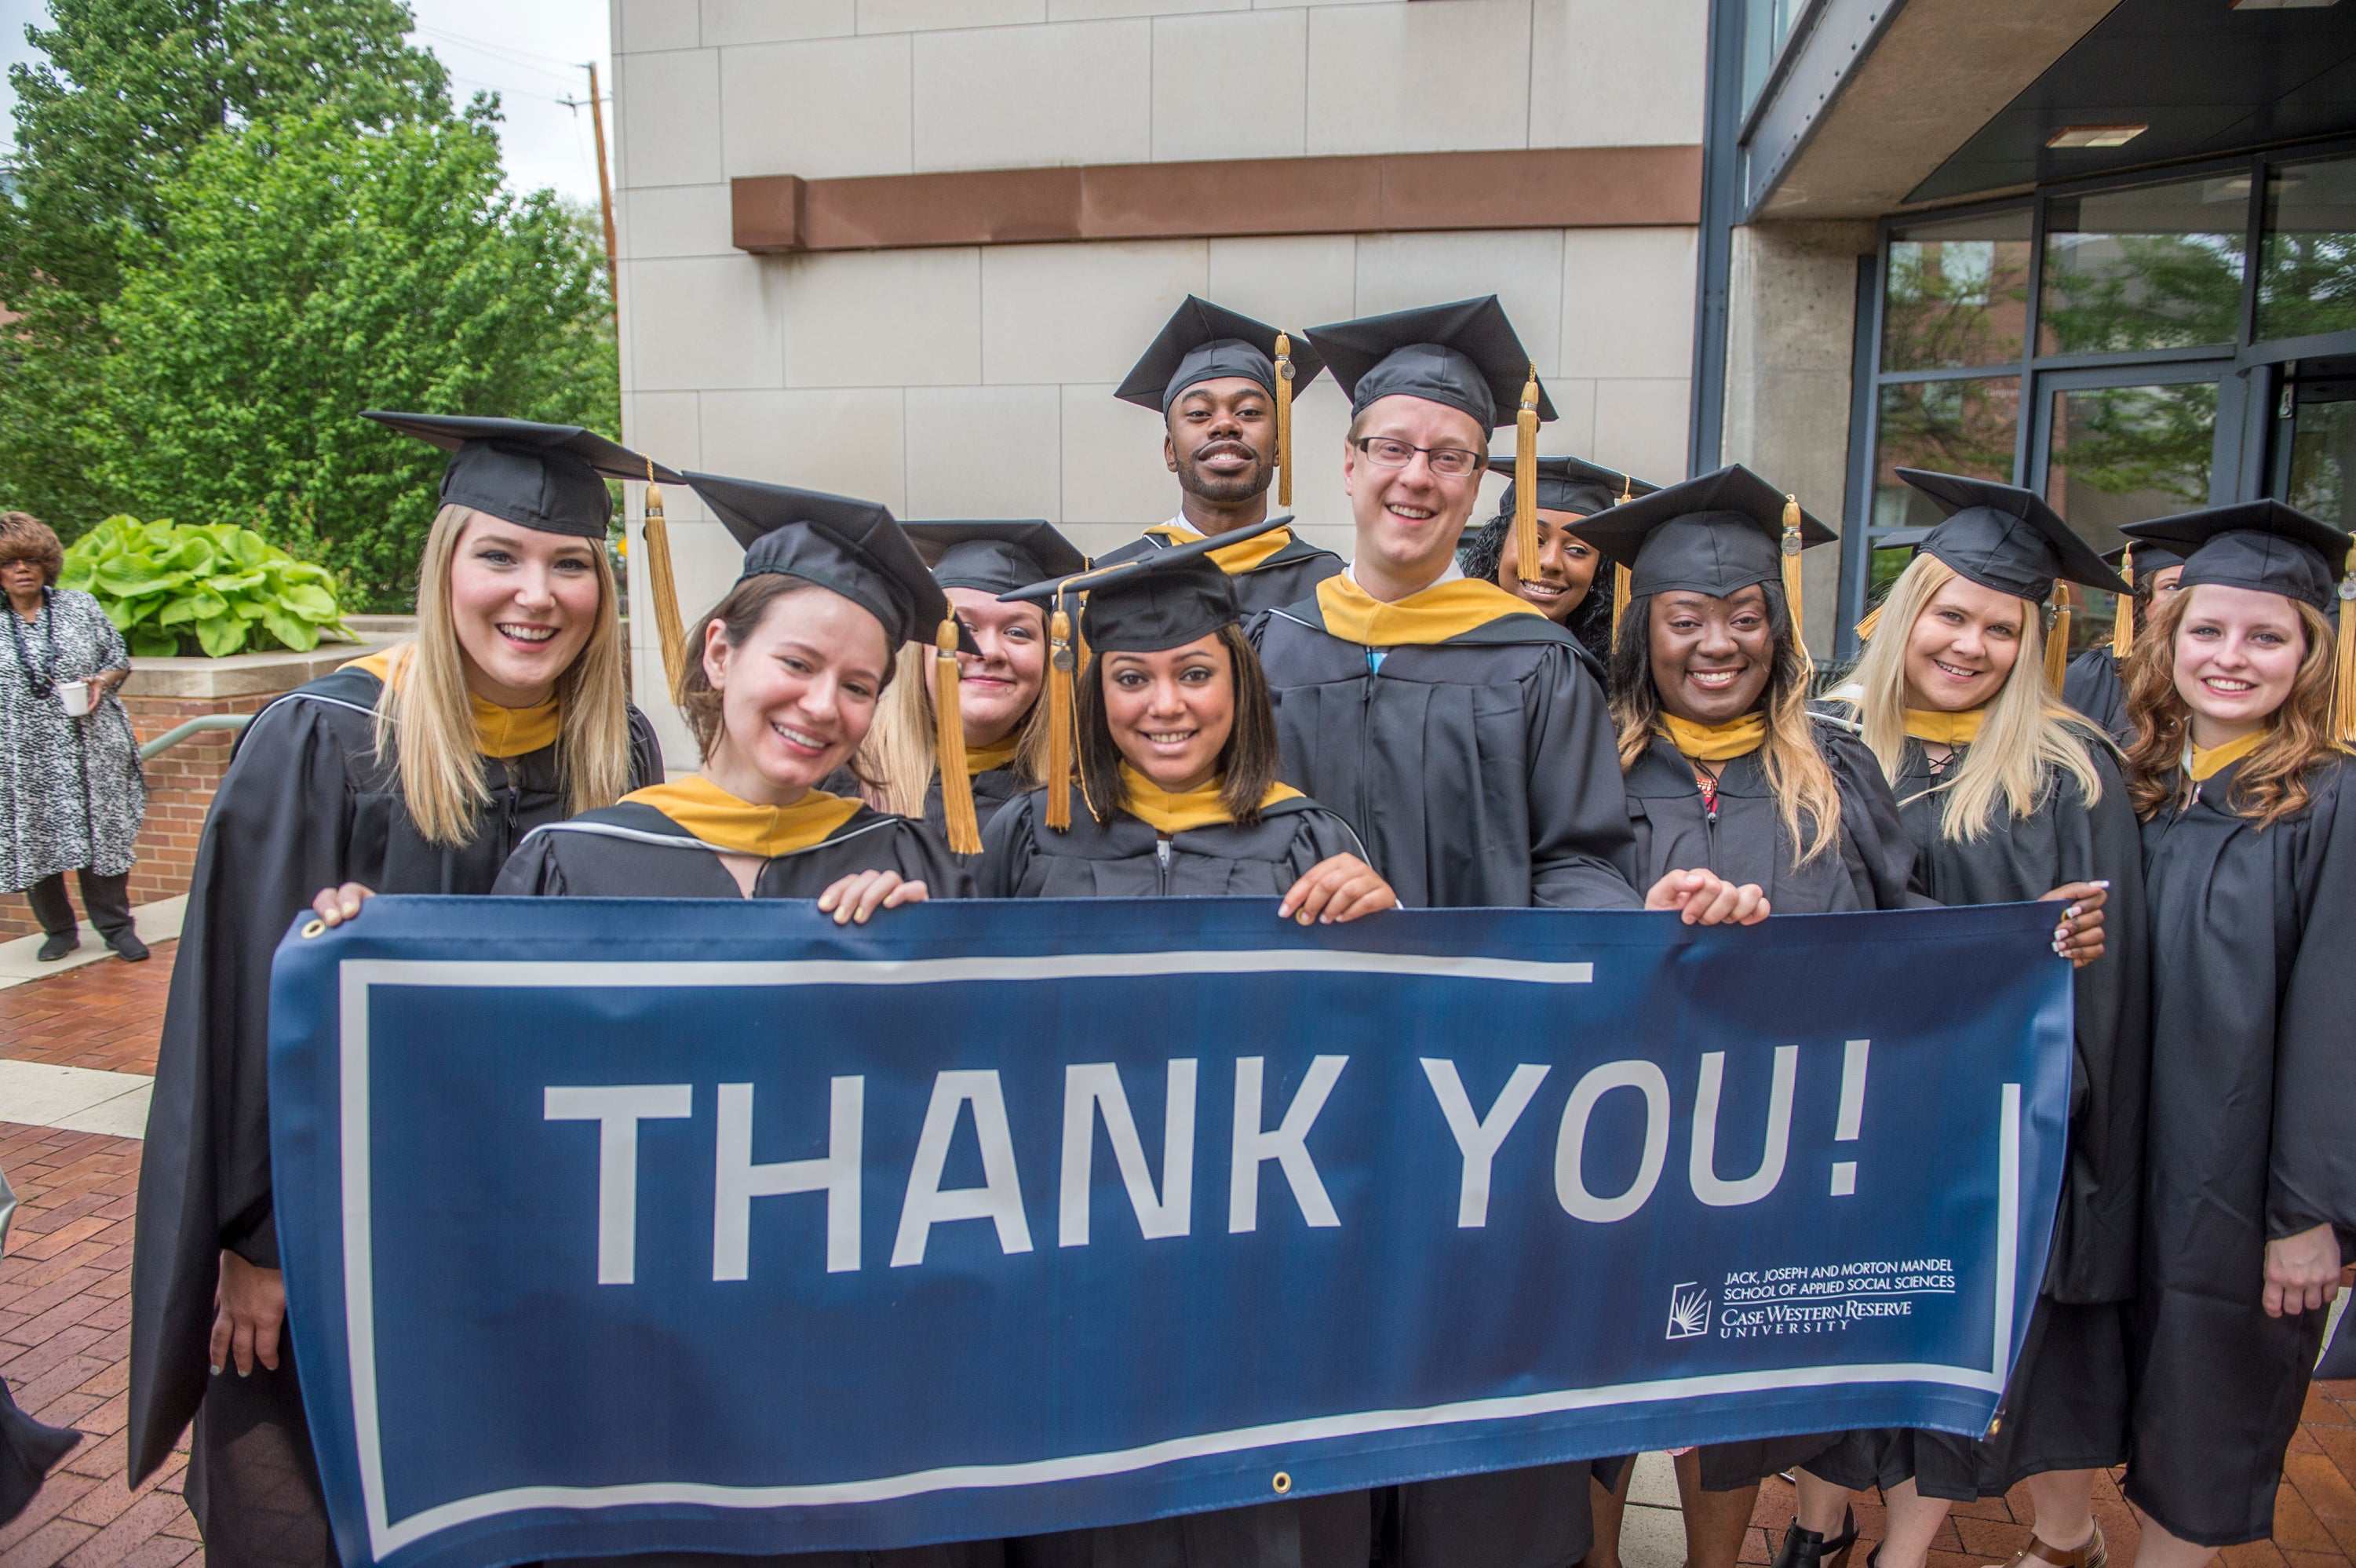 Graduates from the Mandel School of Applied Social Sciences at CWRU pose in caps and gowns, smiling while hold up a blue sign that reads "Thank You!" in all caps